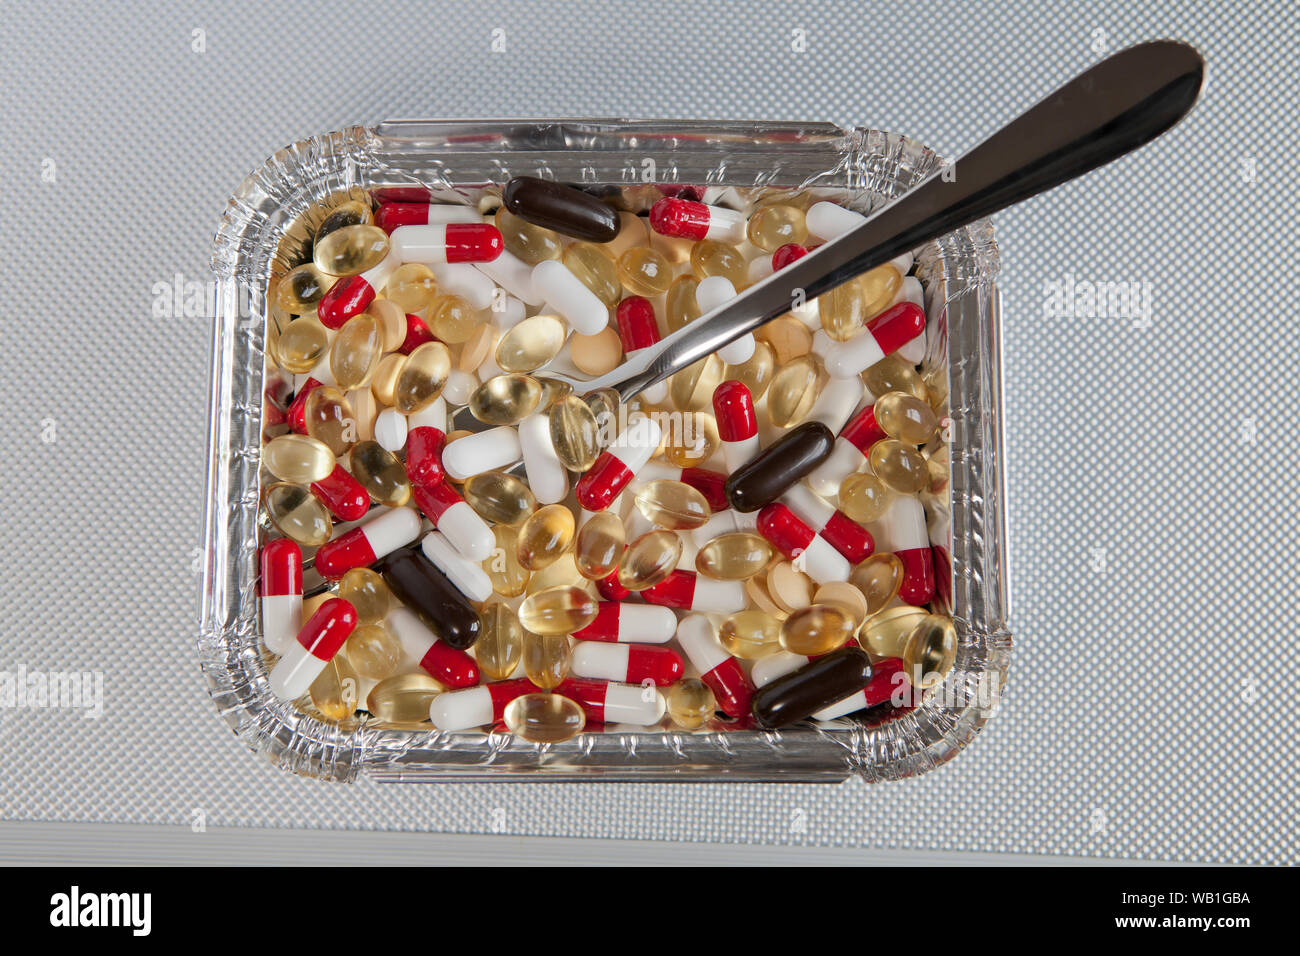 A selection of different pills in a fast food container. Stock Photo